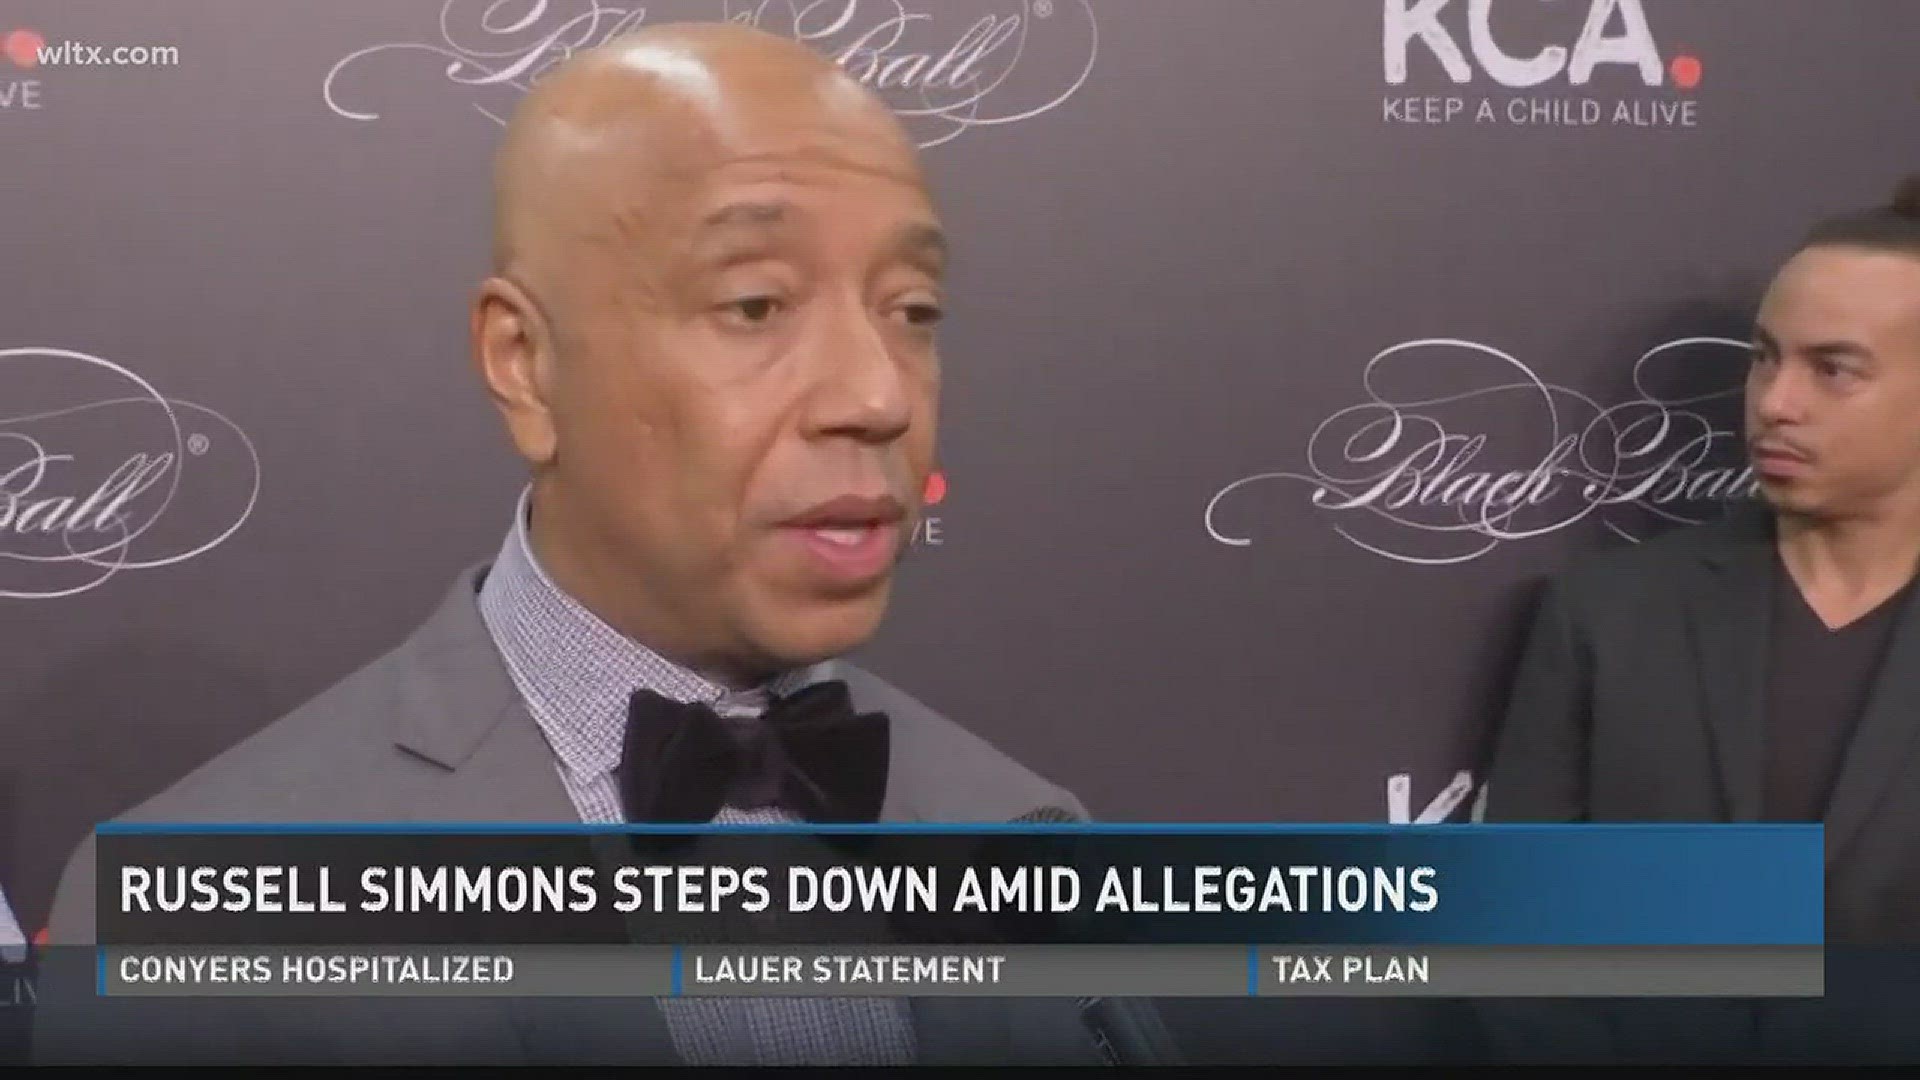 Def Jam Records founder Russell Simmons says he is stepping away from his companies following a second allegation of sexual misconduct.